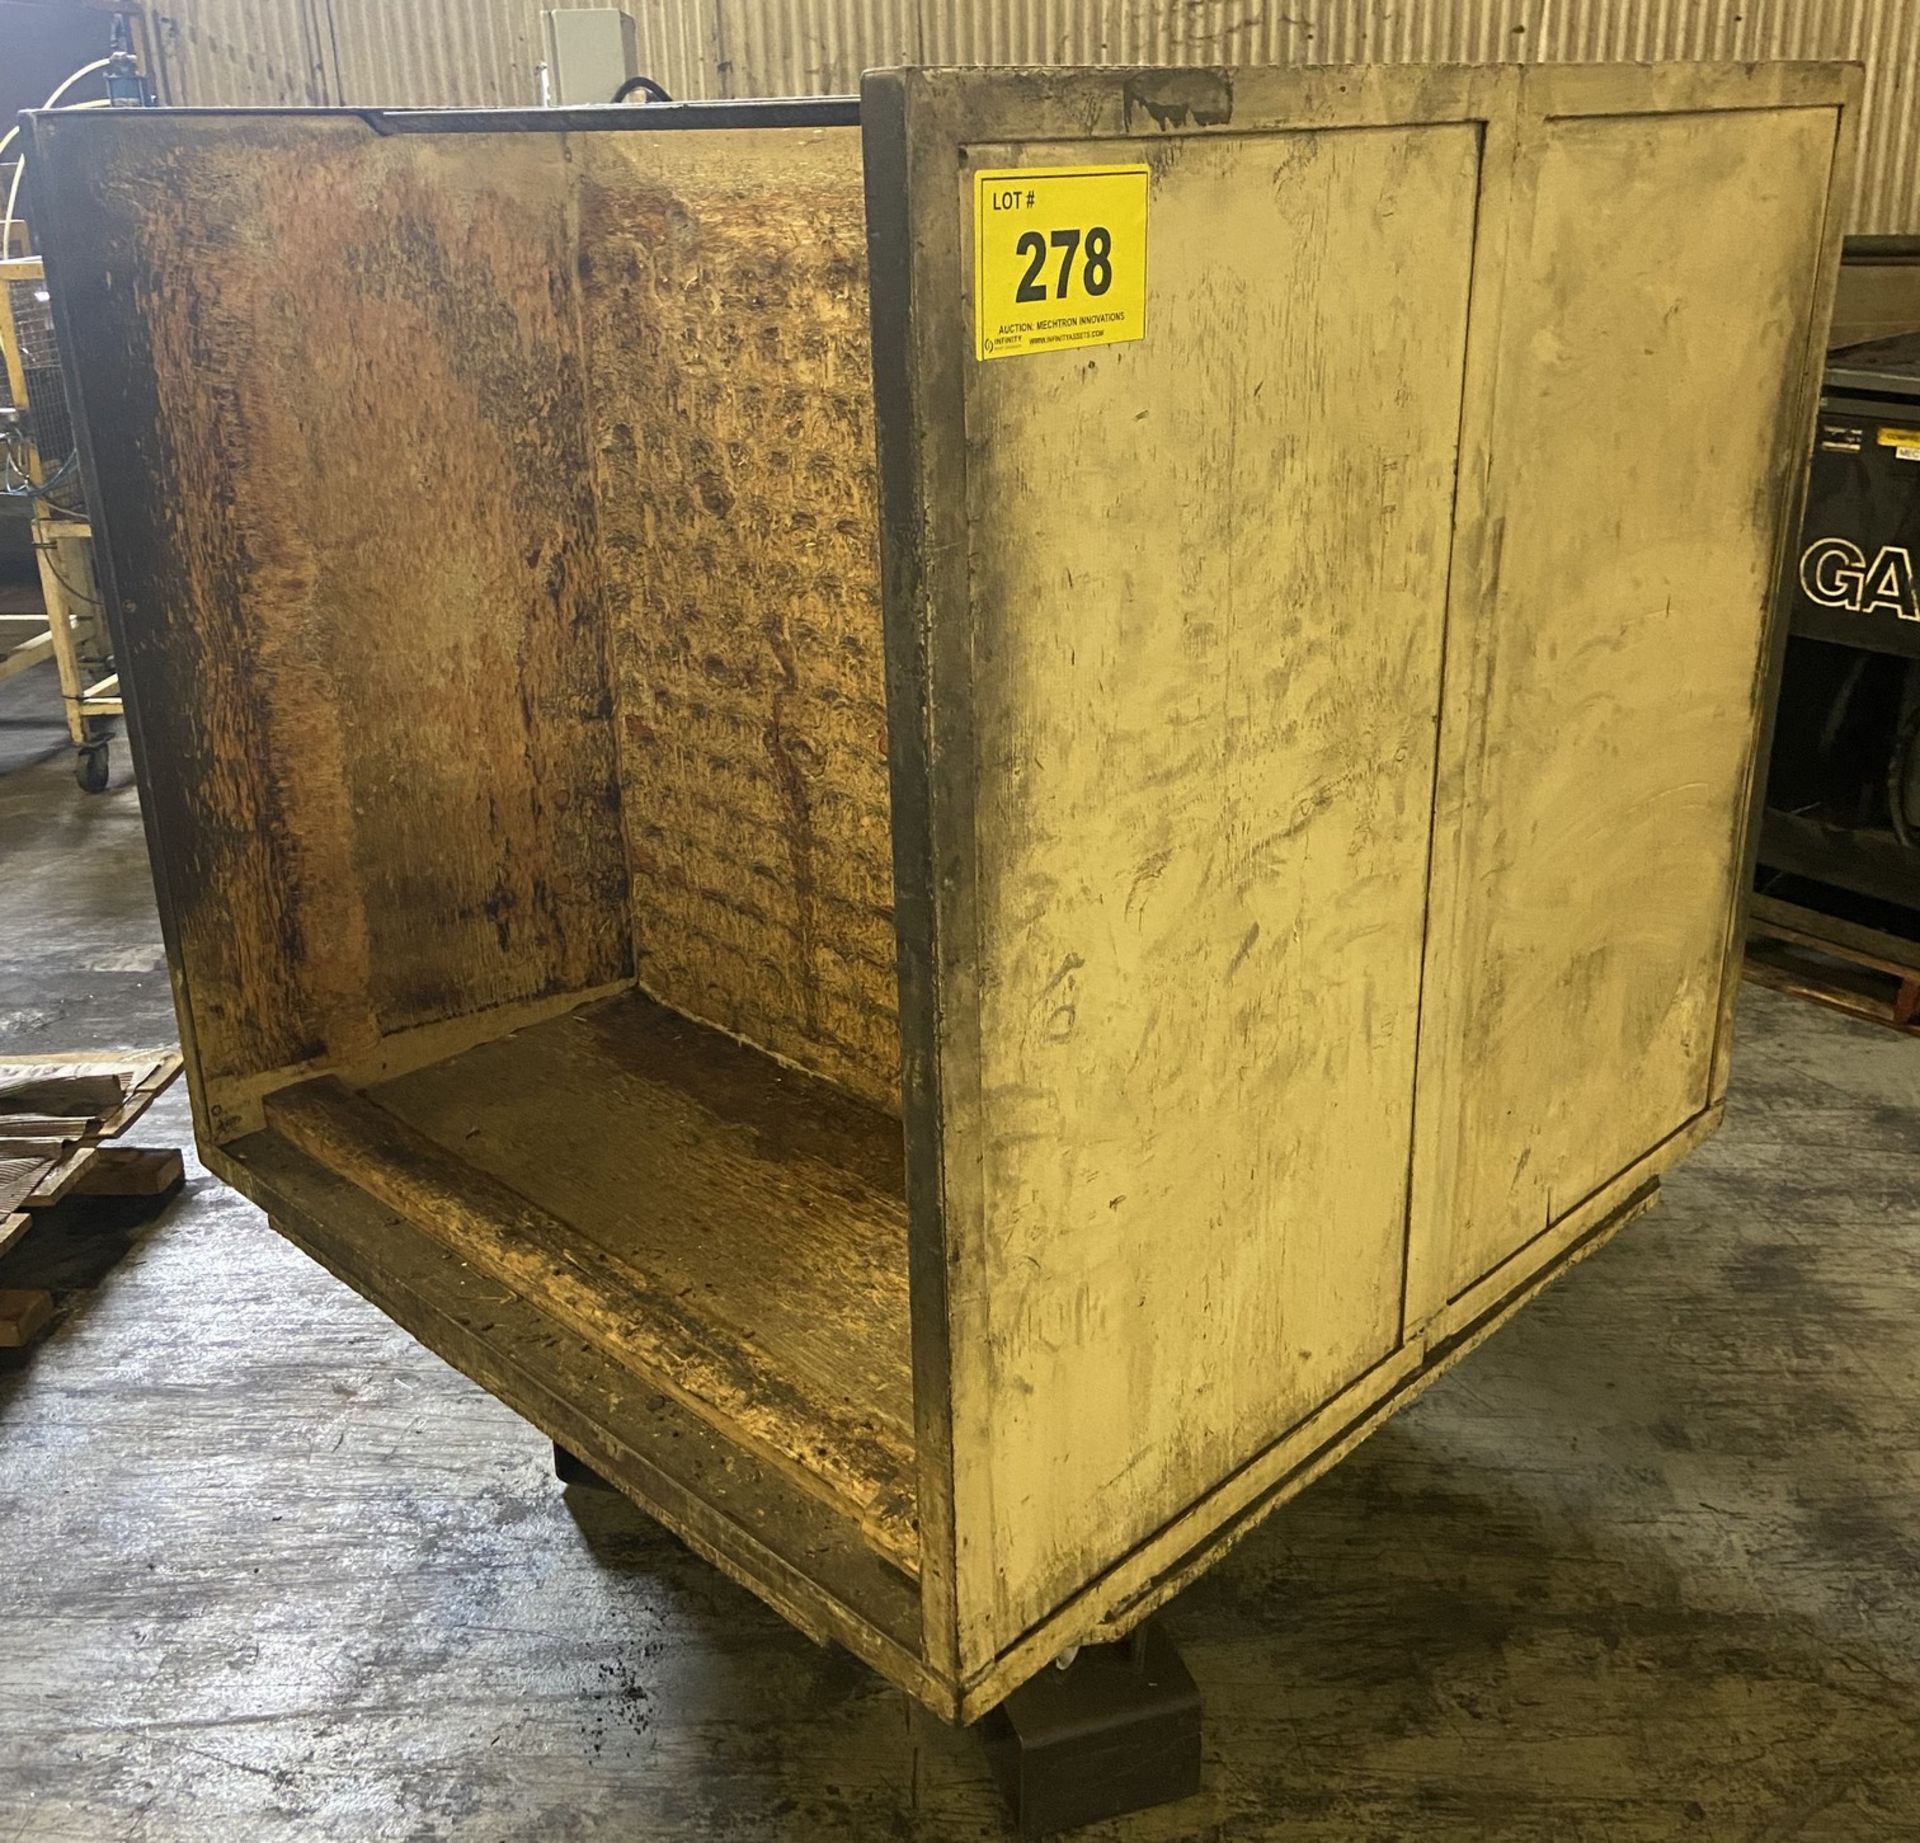 DOUBLE SIDED ROTARY STACKING BIN